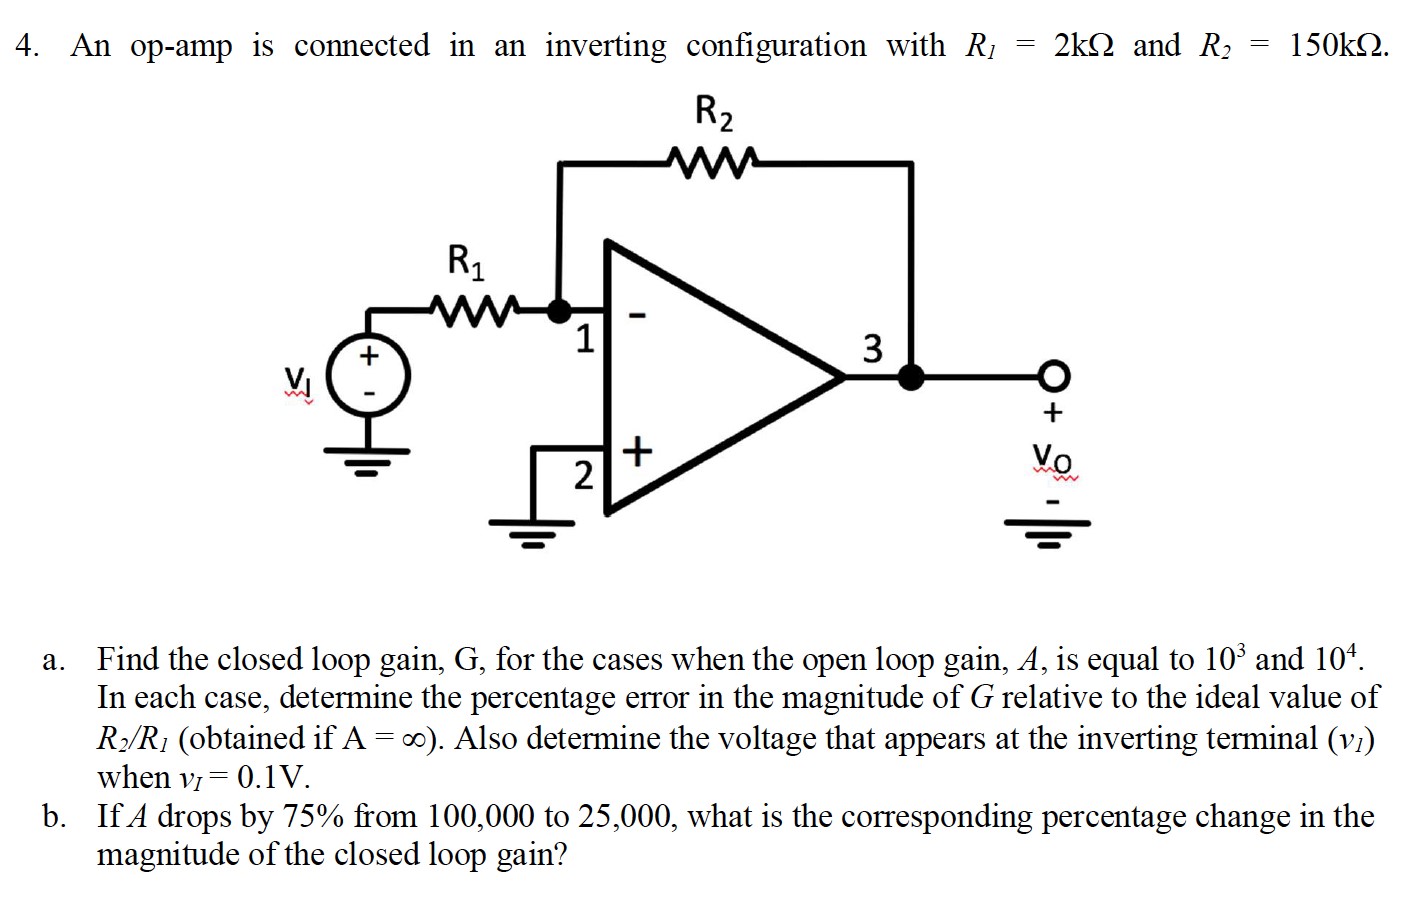 An op-amp is connected in an inverting configuration with R1 = 2 kΩ and R2 = 150 kΩ. a. Find the closed loop gain, G, for the cases when the open loop gain, A, is equal to 103 and 104. In each case, determine the percentage error in the magnitude of G relative to the ideal value of R2/R1 (obtained if A = ∞). Also determine the voltage that appears at the inverting terminal (v1) when vI = 0.1 V. b. If A drops by 75% from 100, 000 to 25, 000 , what is the corresponding percentage change in the magnitude of the closed loop gain?